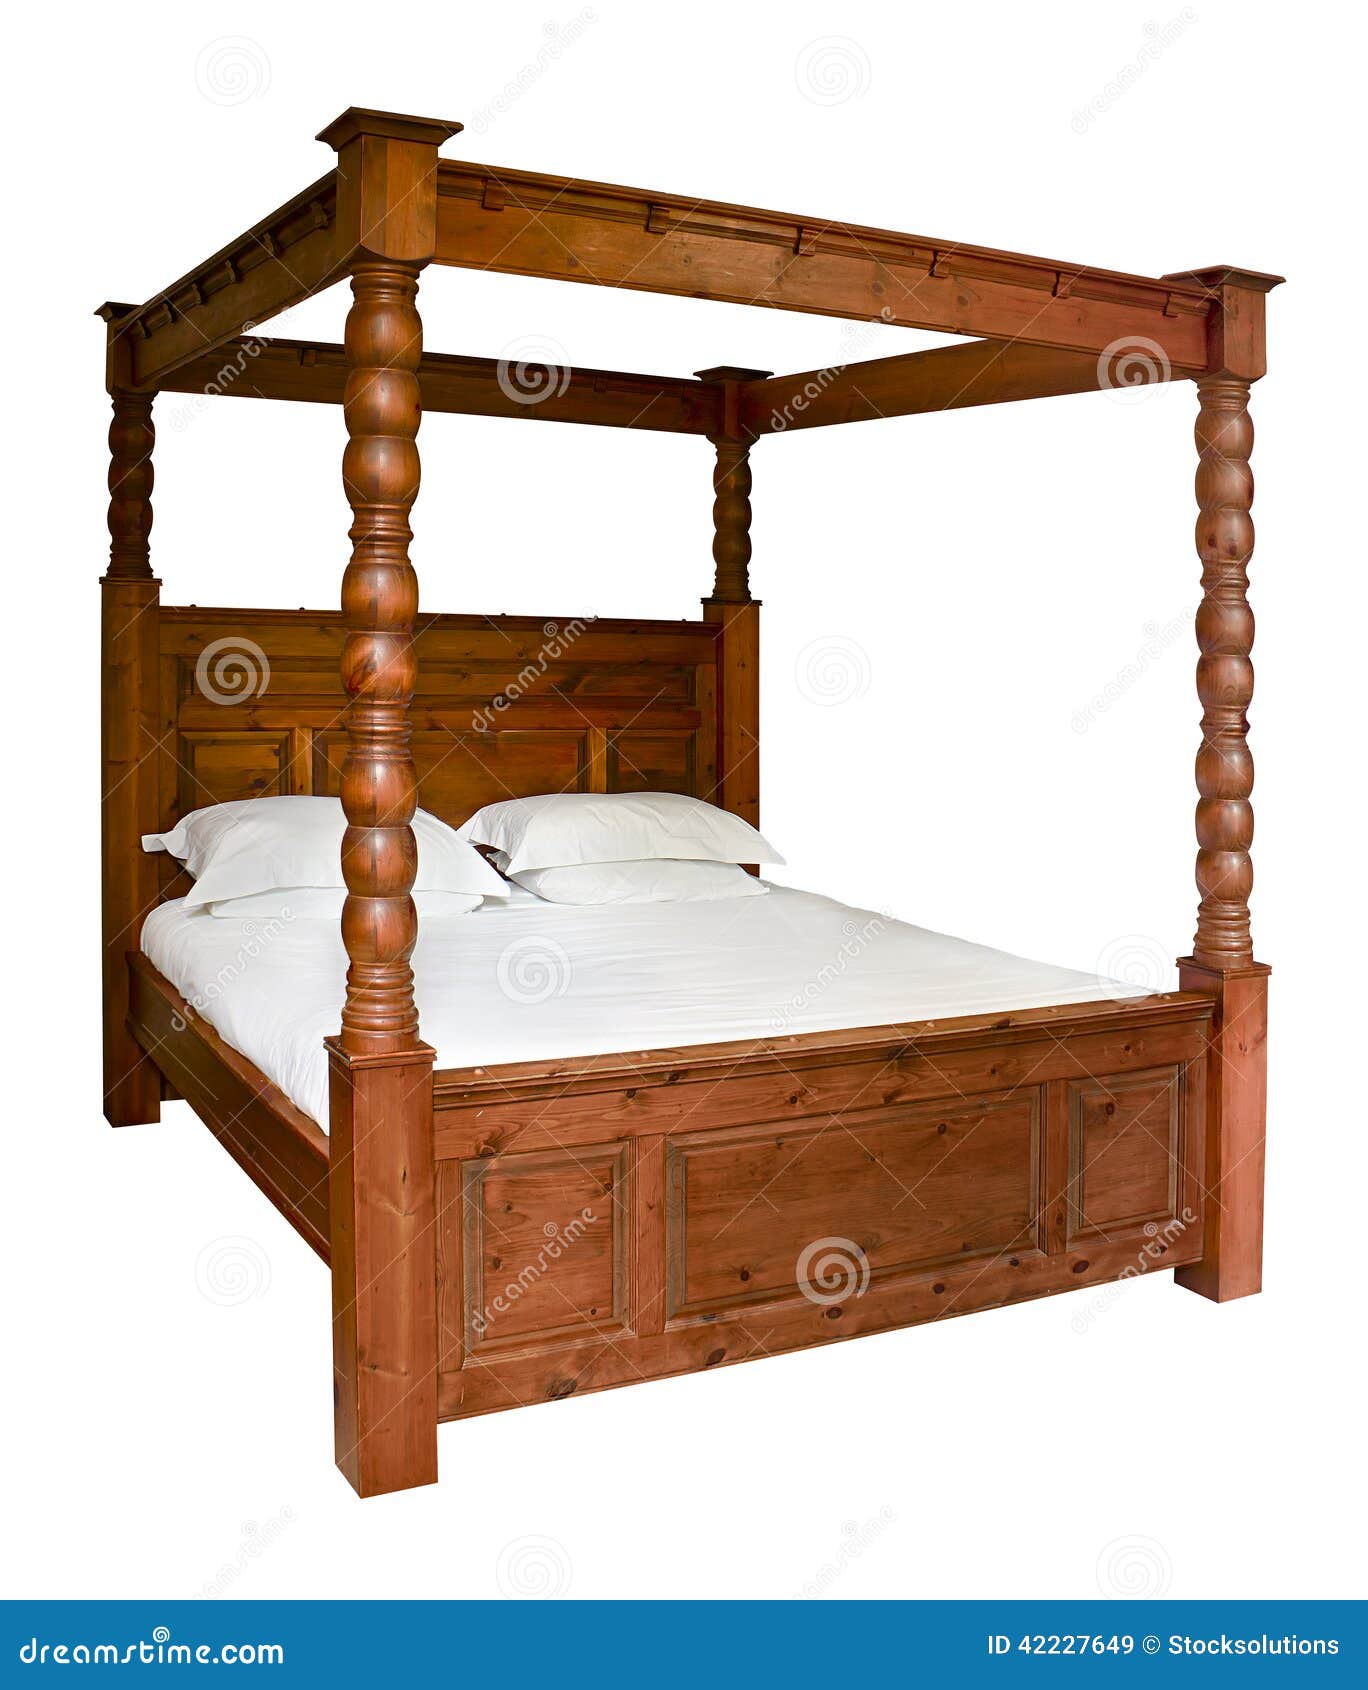 traditional four poster bed wooden isolated against white background 42227649